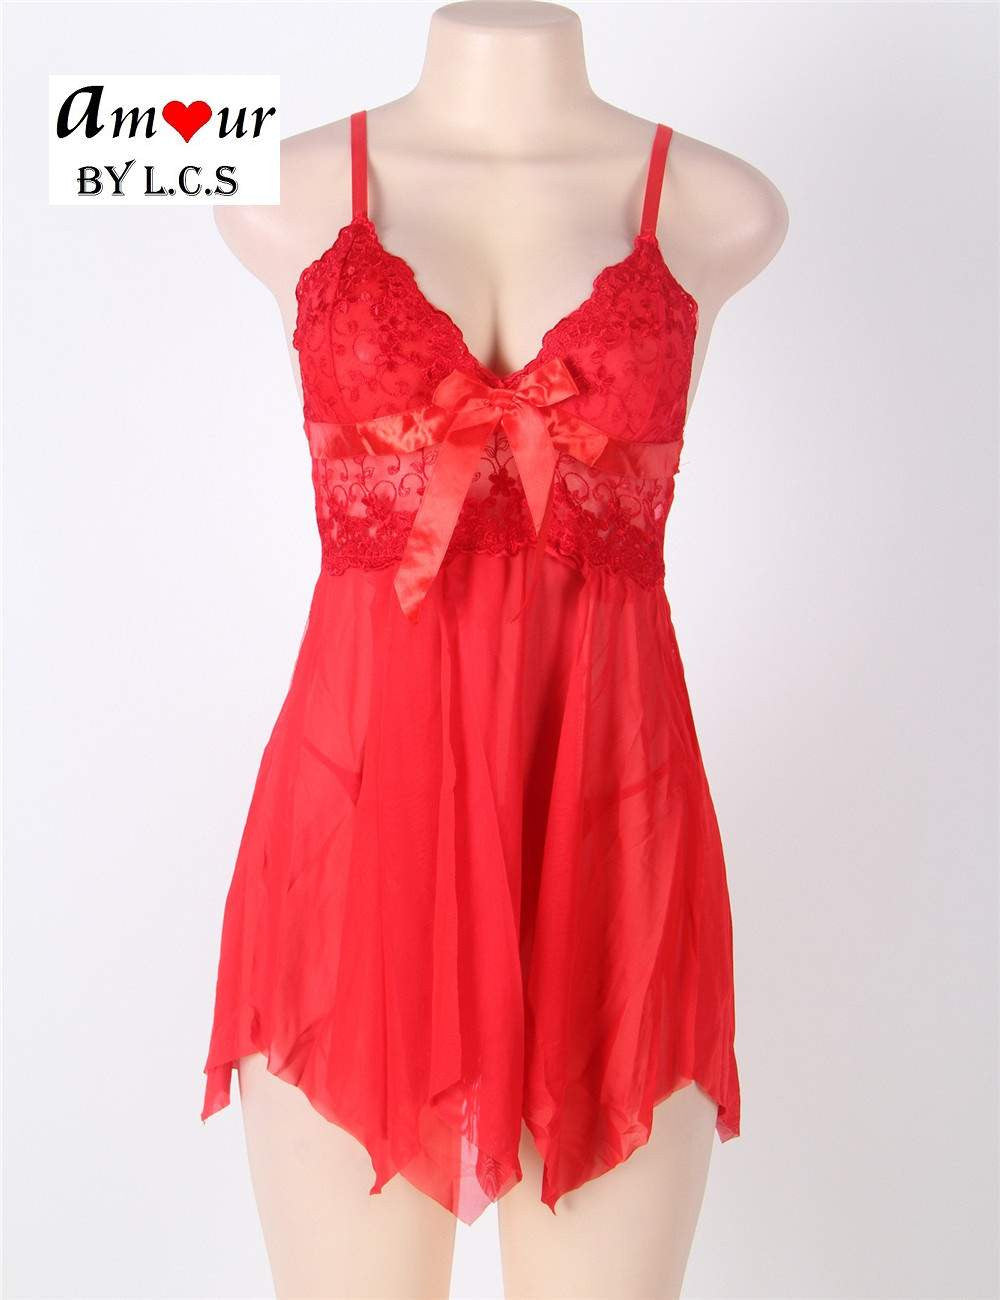 [red lace babydoll on mannikin] - AMOUR Lingerie